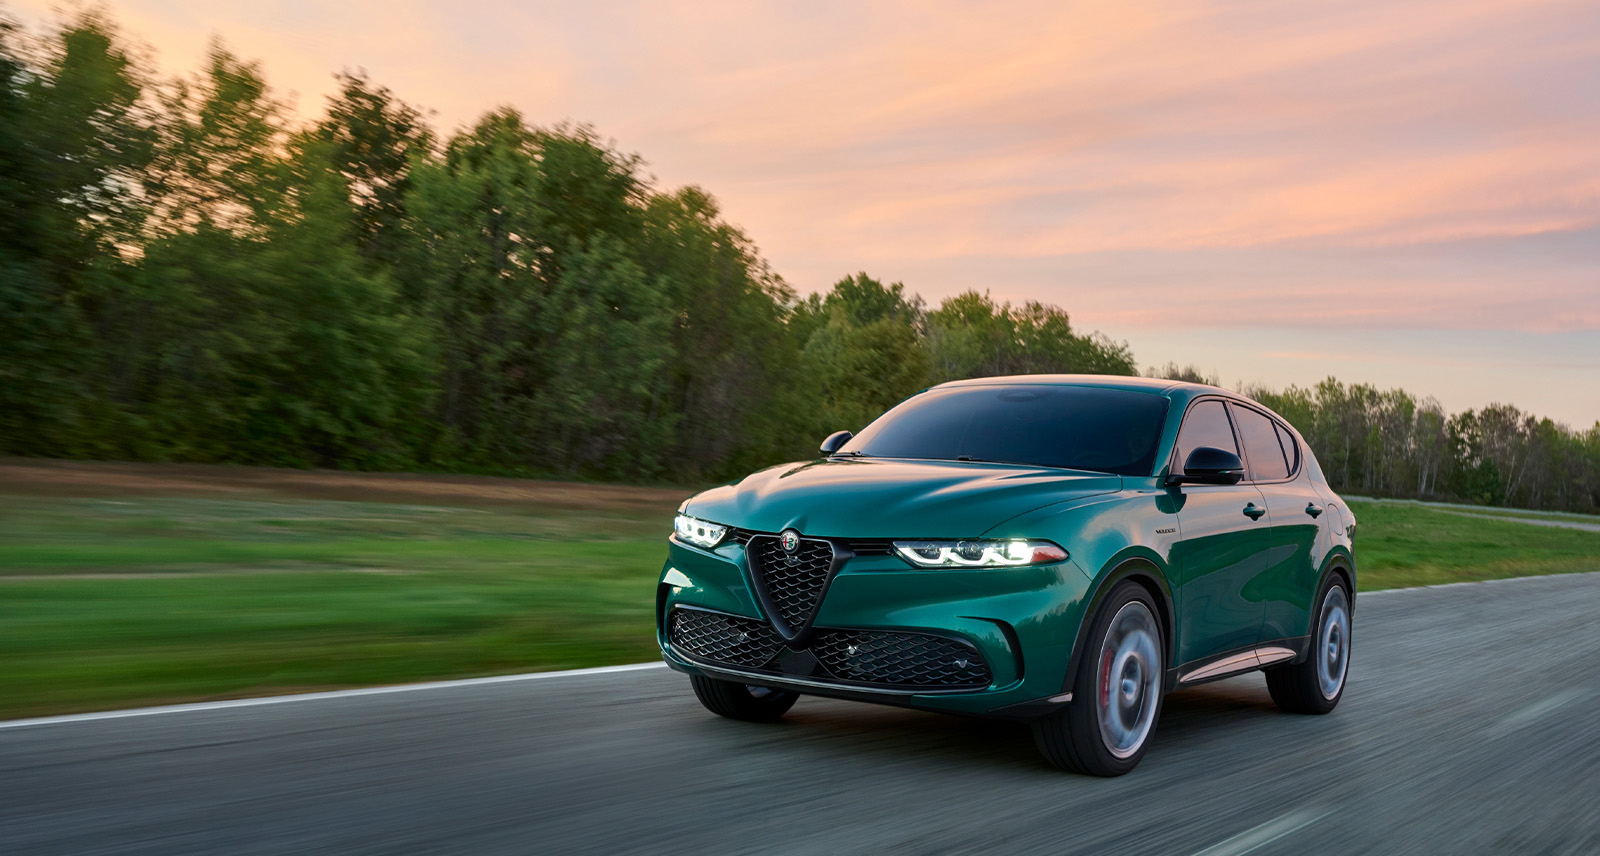 Green Alfa Romeo Tonale drives along a highway at sunset there are trees in the back